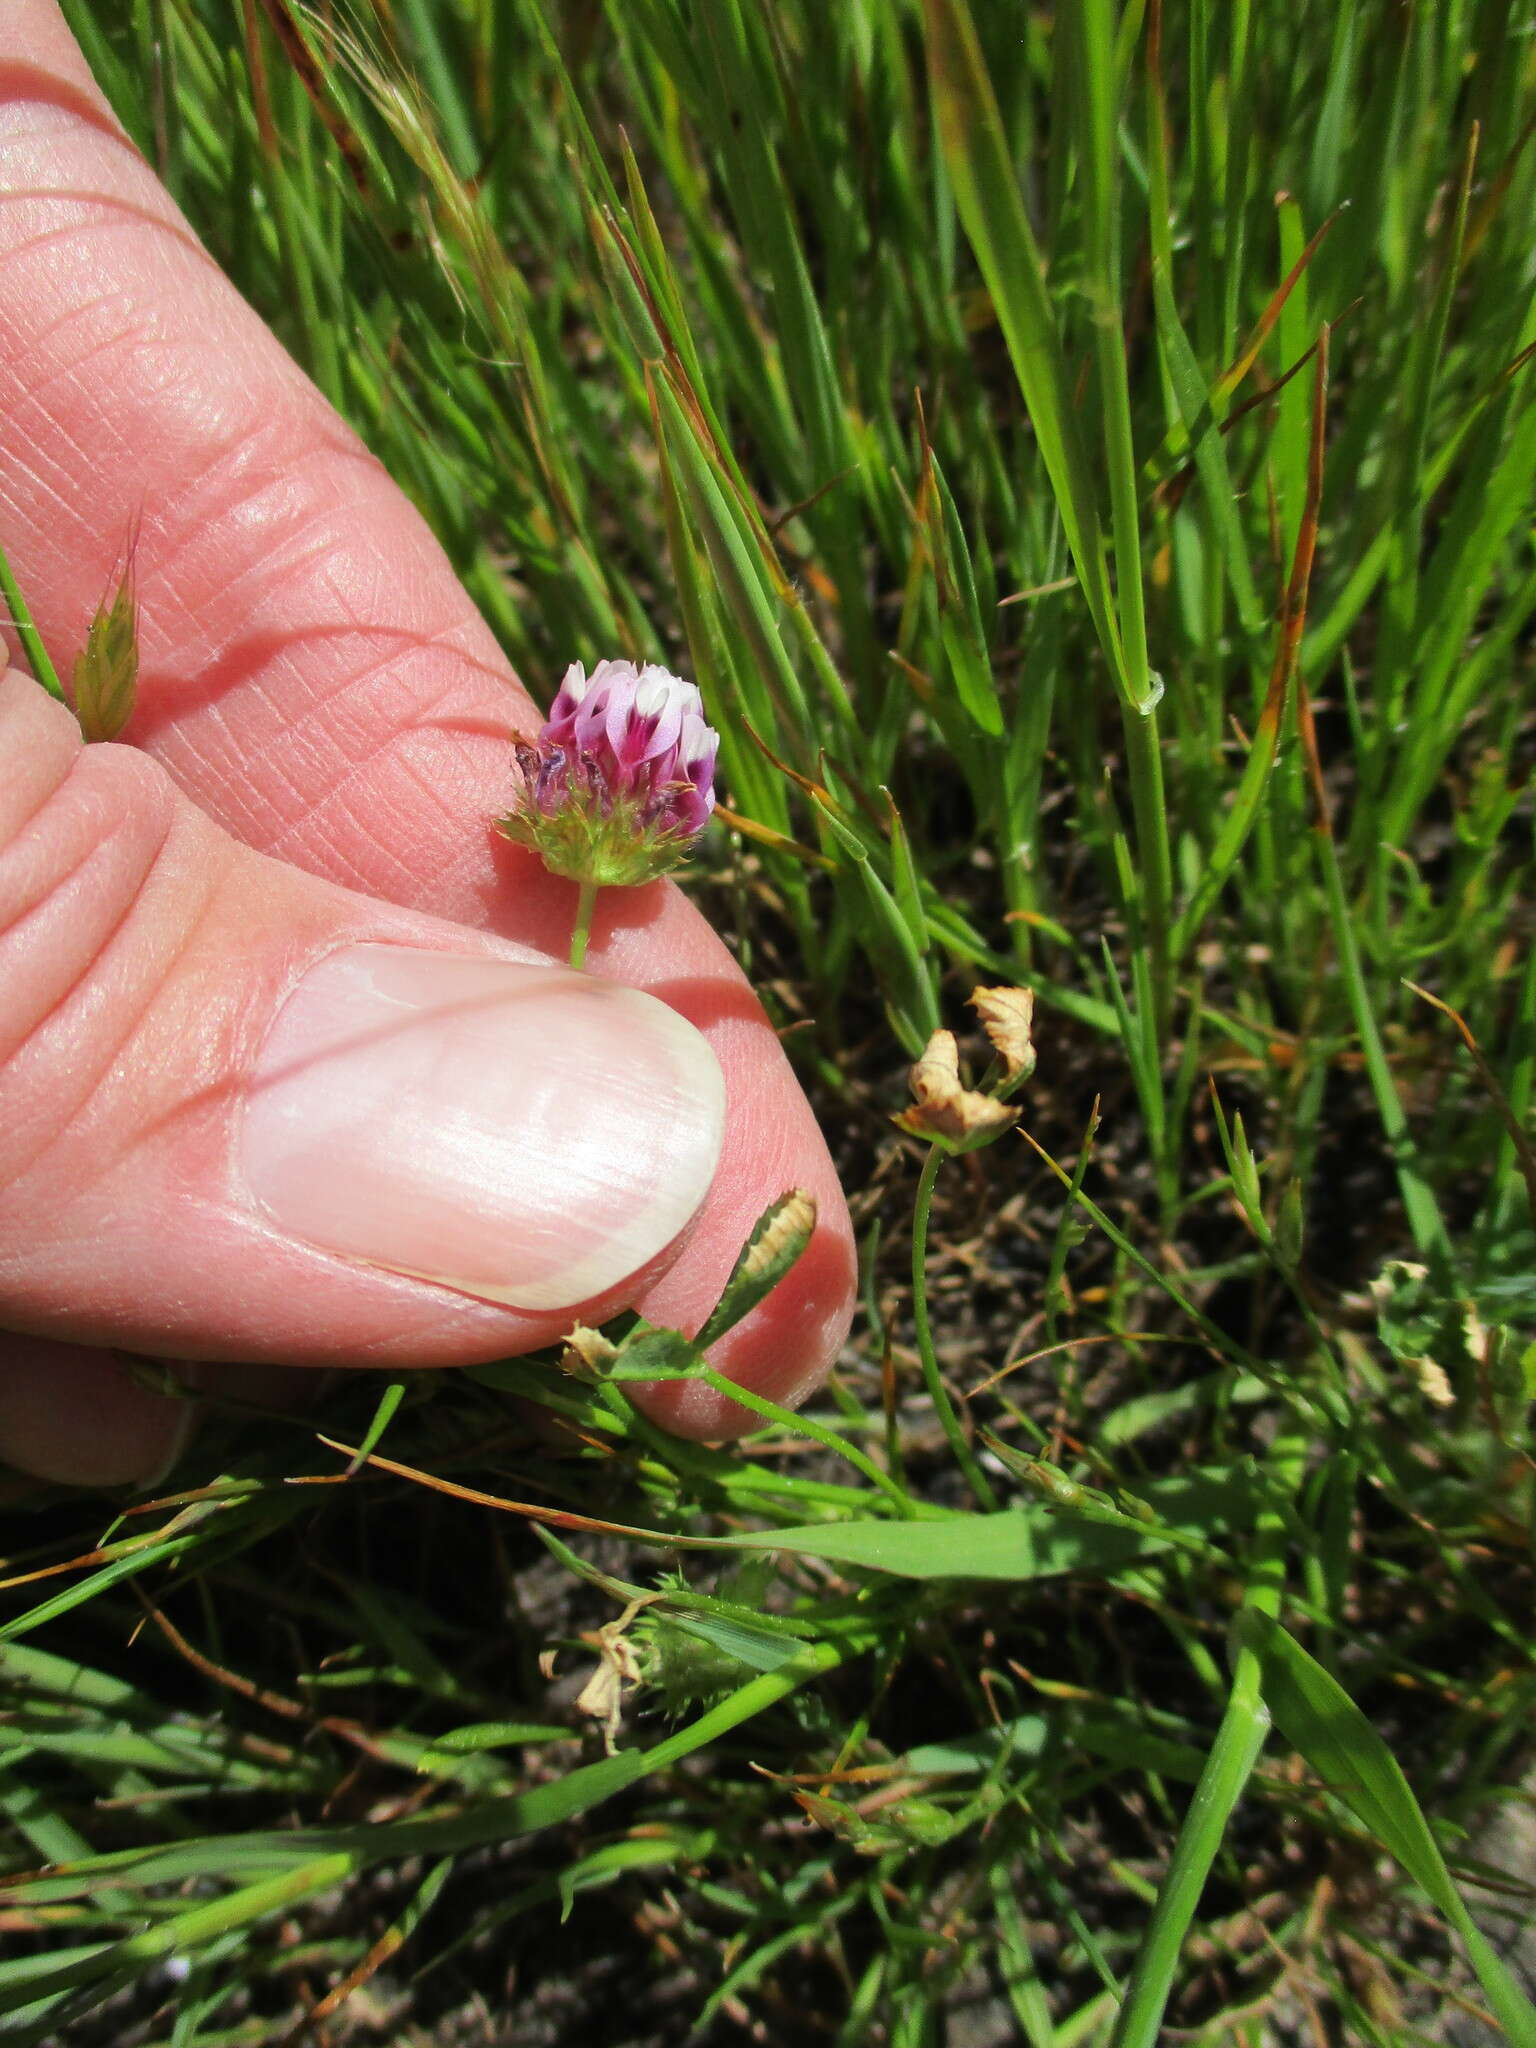 Image of Gray's Clover